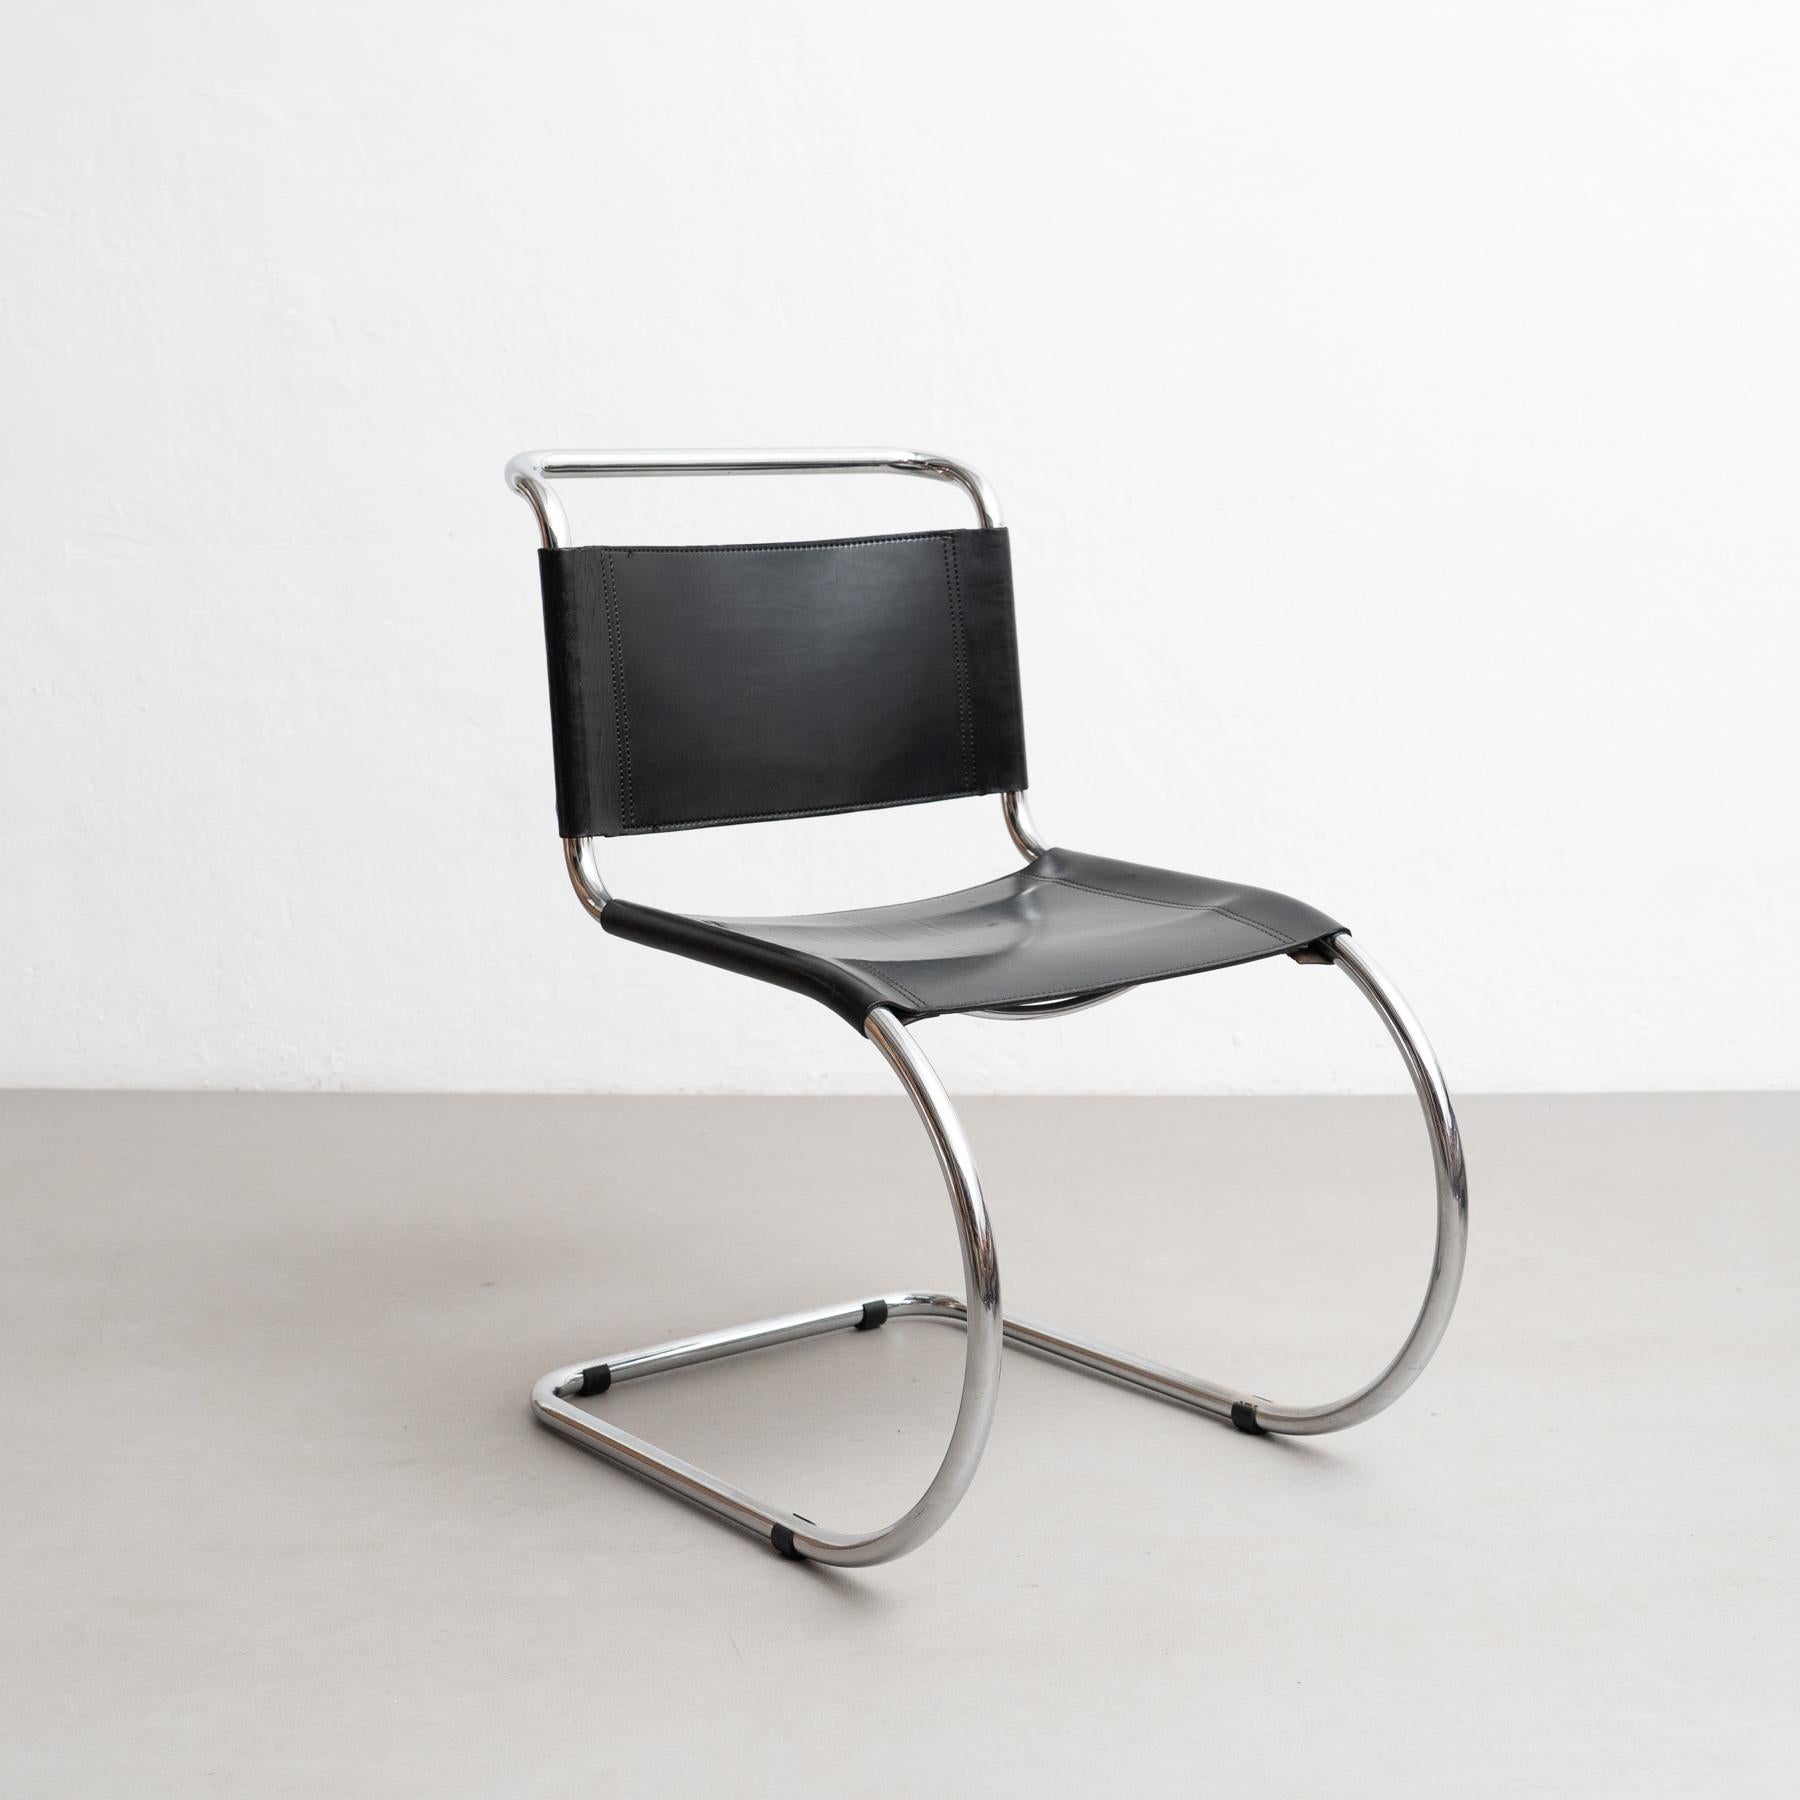 Embrace the refined simplicity of modern architecture with this stunning MR10 cantilever chair, designed by the renowned Ludwig Mies van der Rohe circa 1930 and crafted by an unknown manufacturer in Germany around 1960. Inspired by Marcel Breuer's